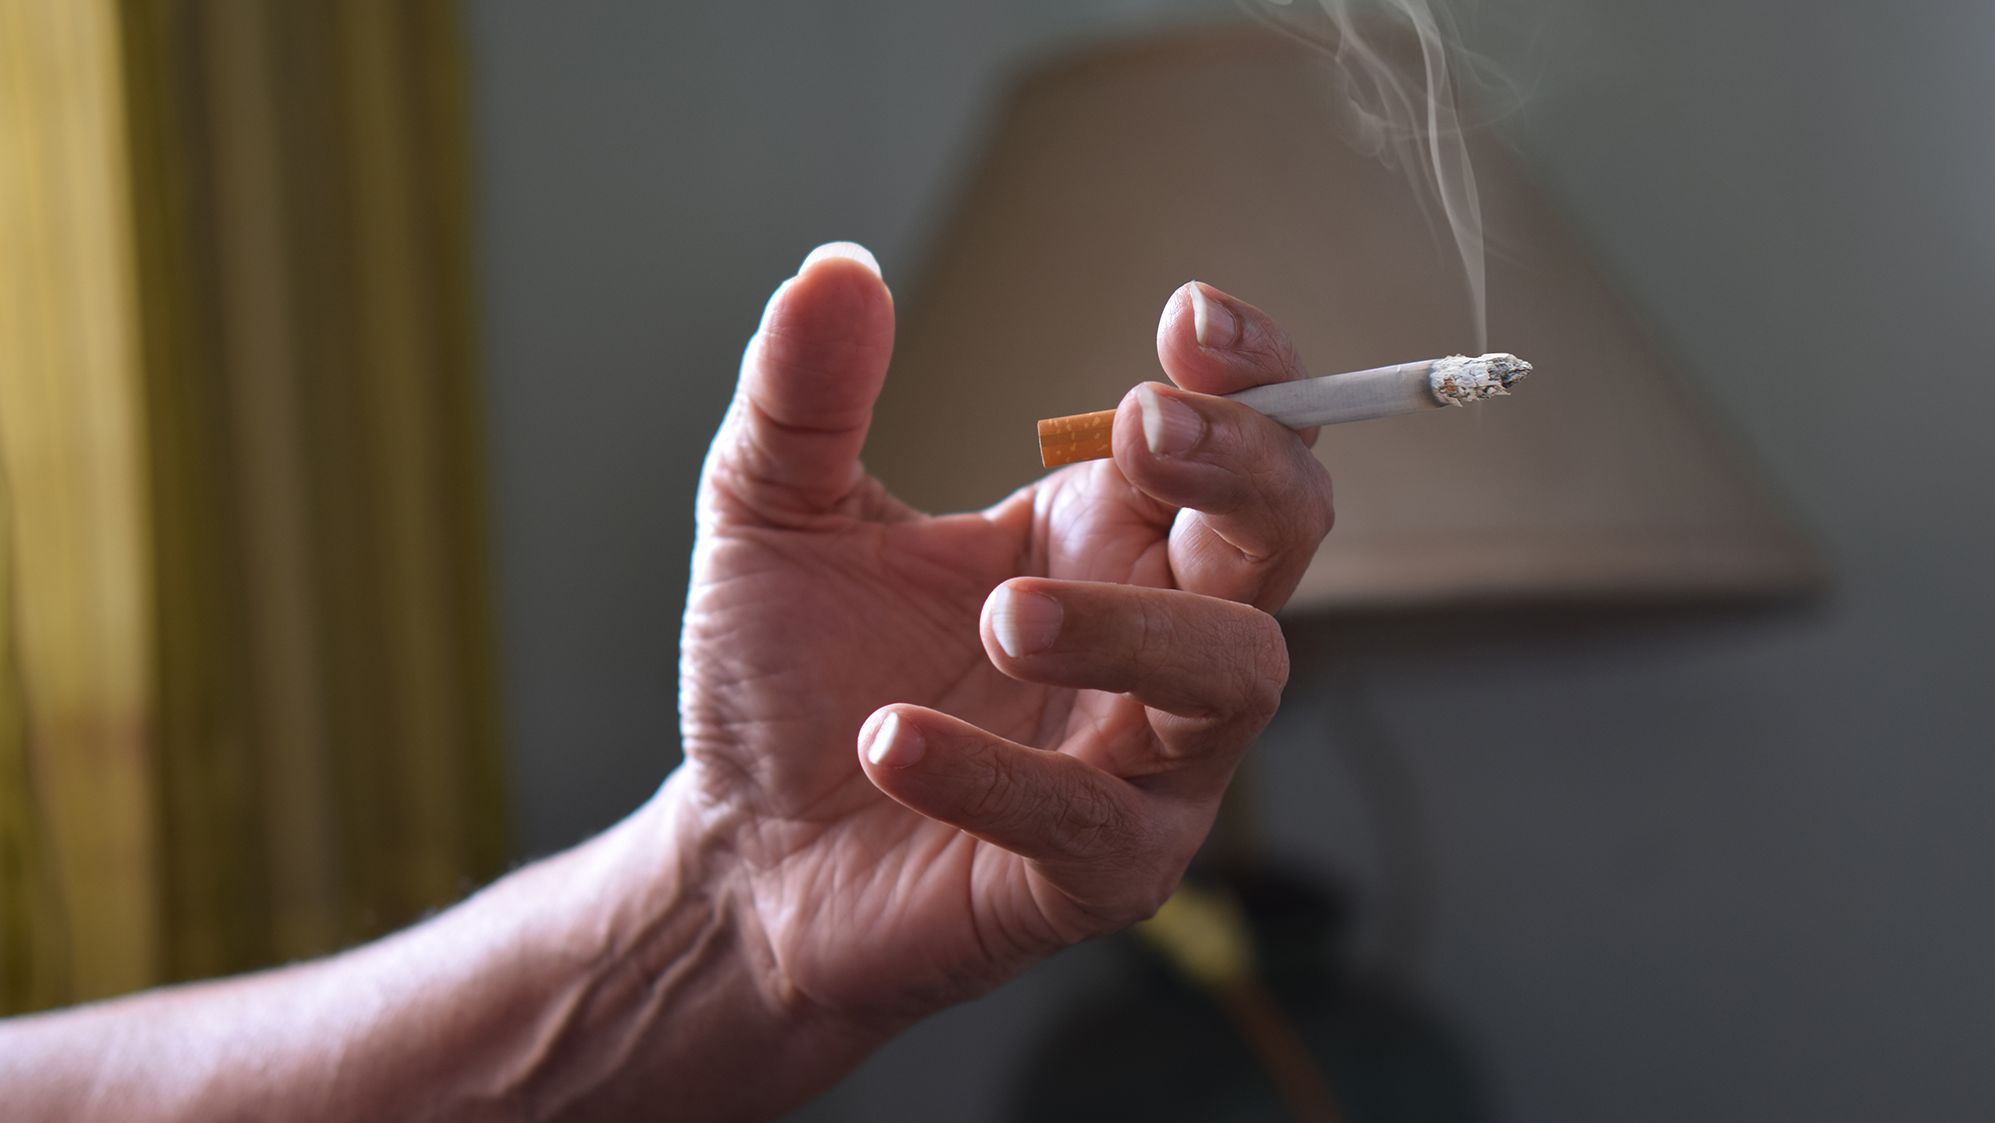 Scientists found a link between smoking tobacco and mental illness.